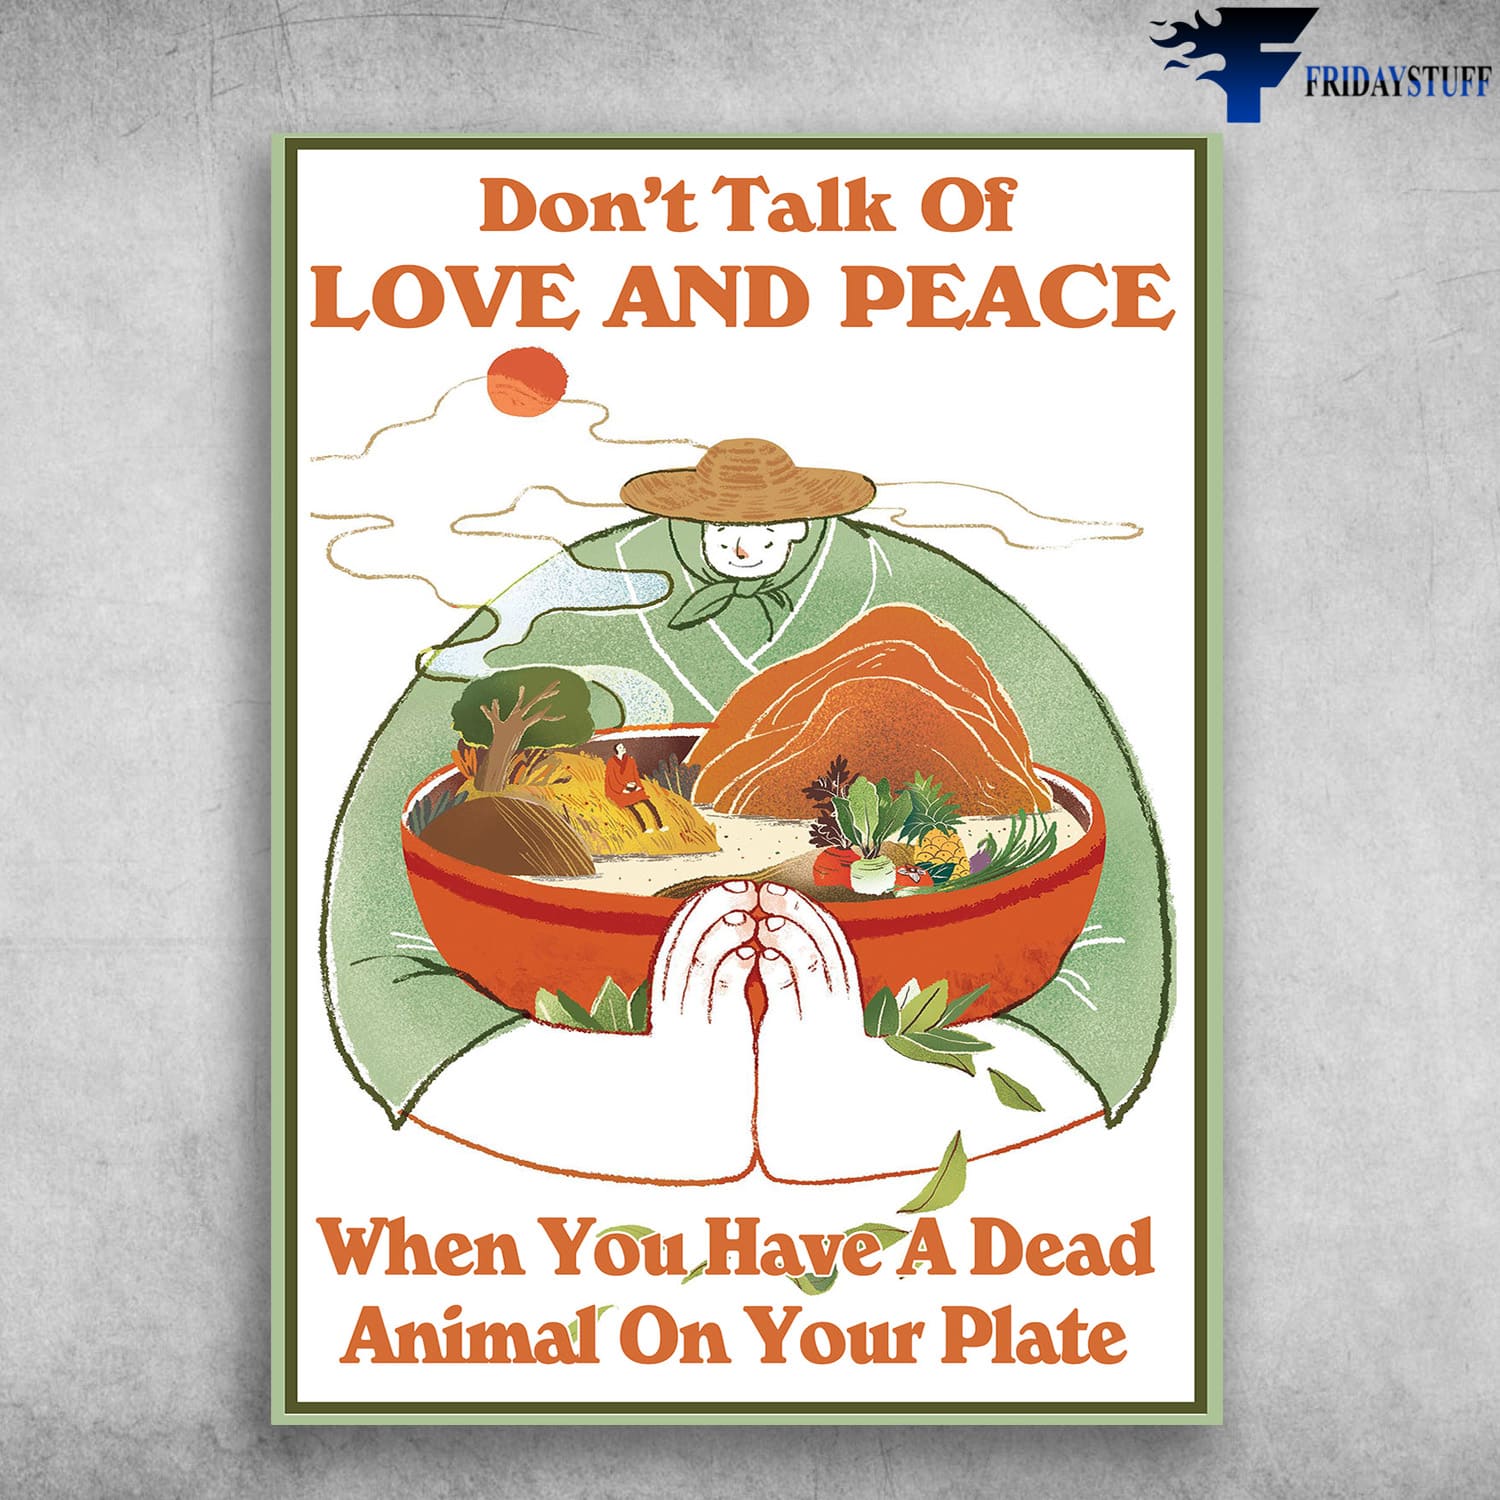 Farmer Poster, Don't Talk Of Love And Peace, When You Have A Dead, Animal On Your Plate